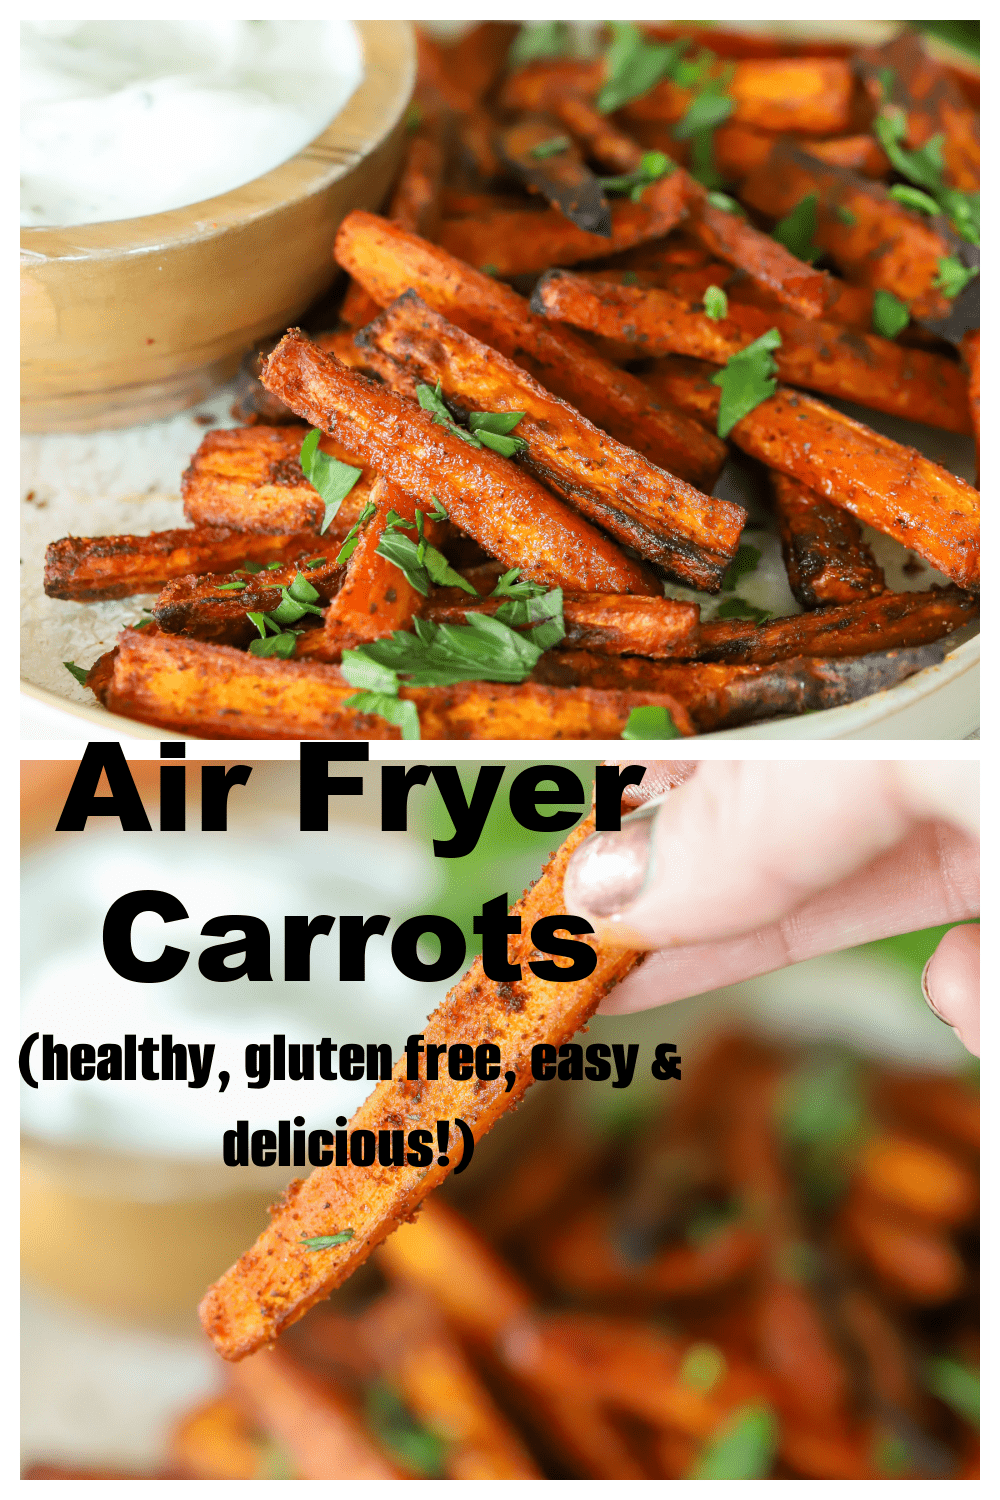 Want a new, fun way to eat your veggies?  These Air Fryer Carrot Fries are!  Healthy, gluten-free, easy and absolutely delicious.  via @jennikolaus